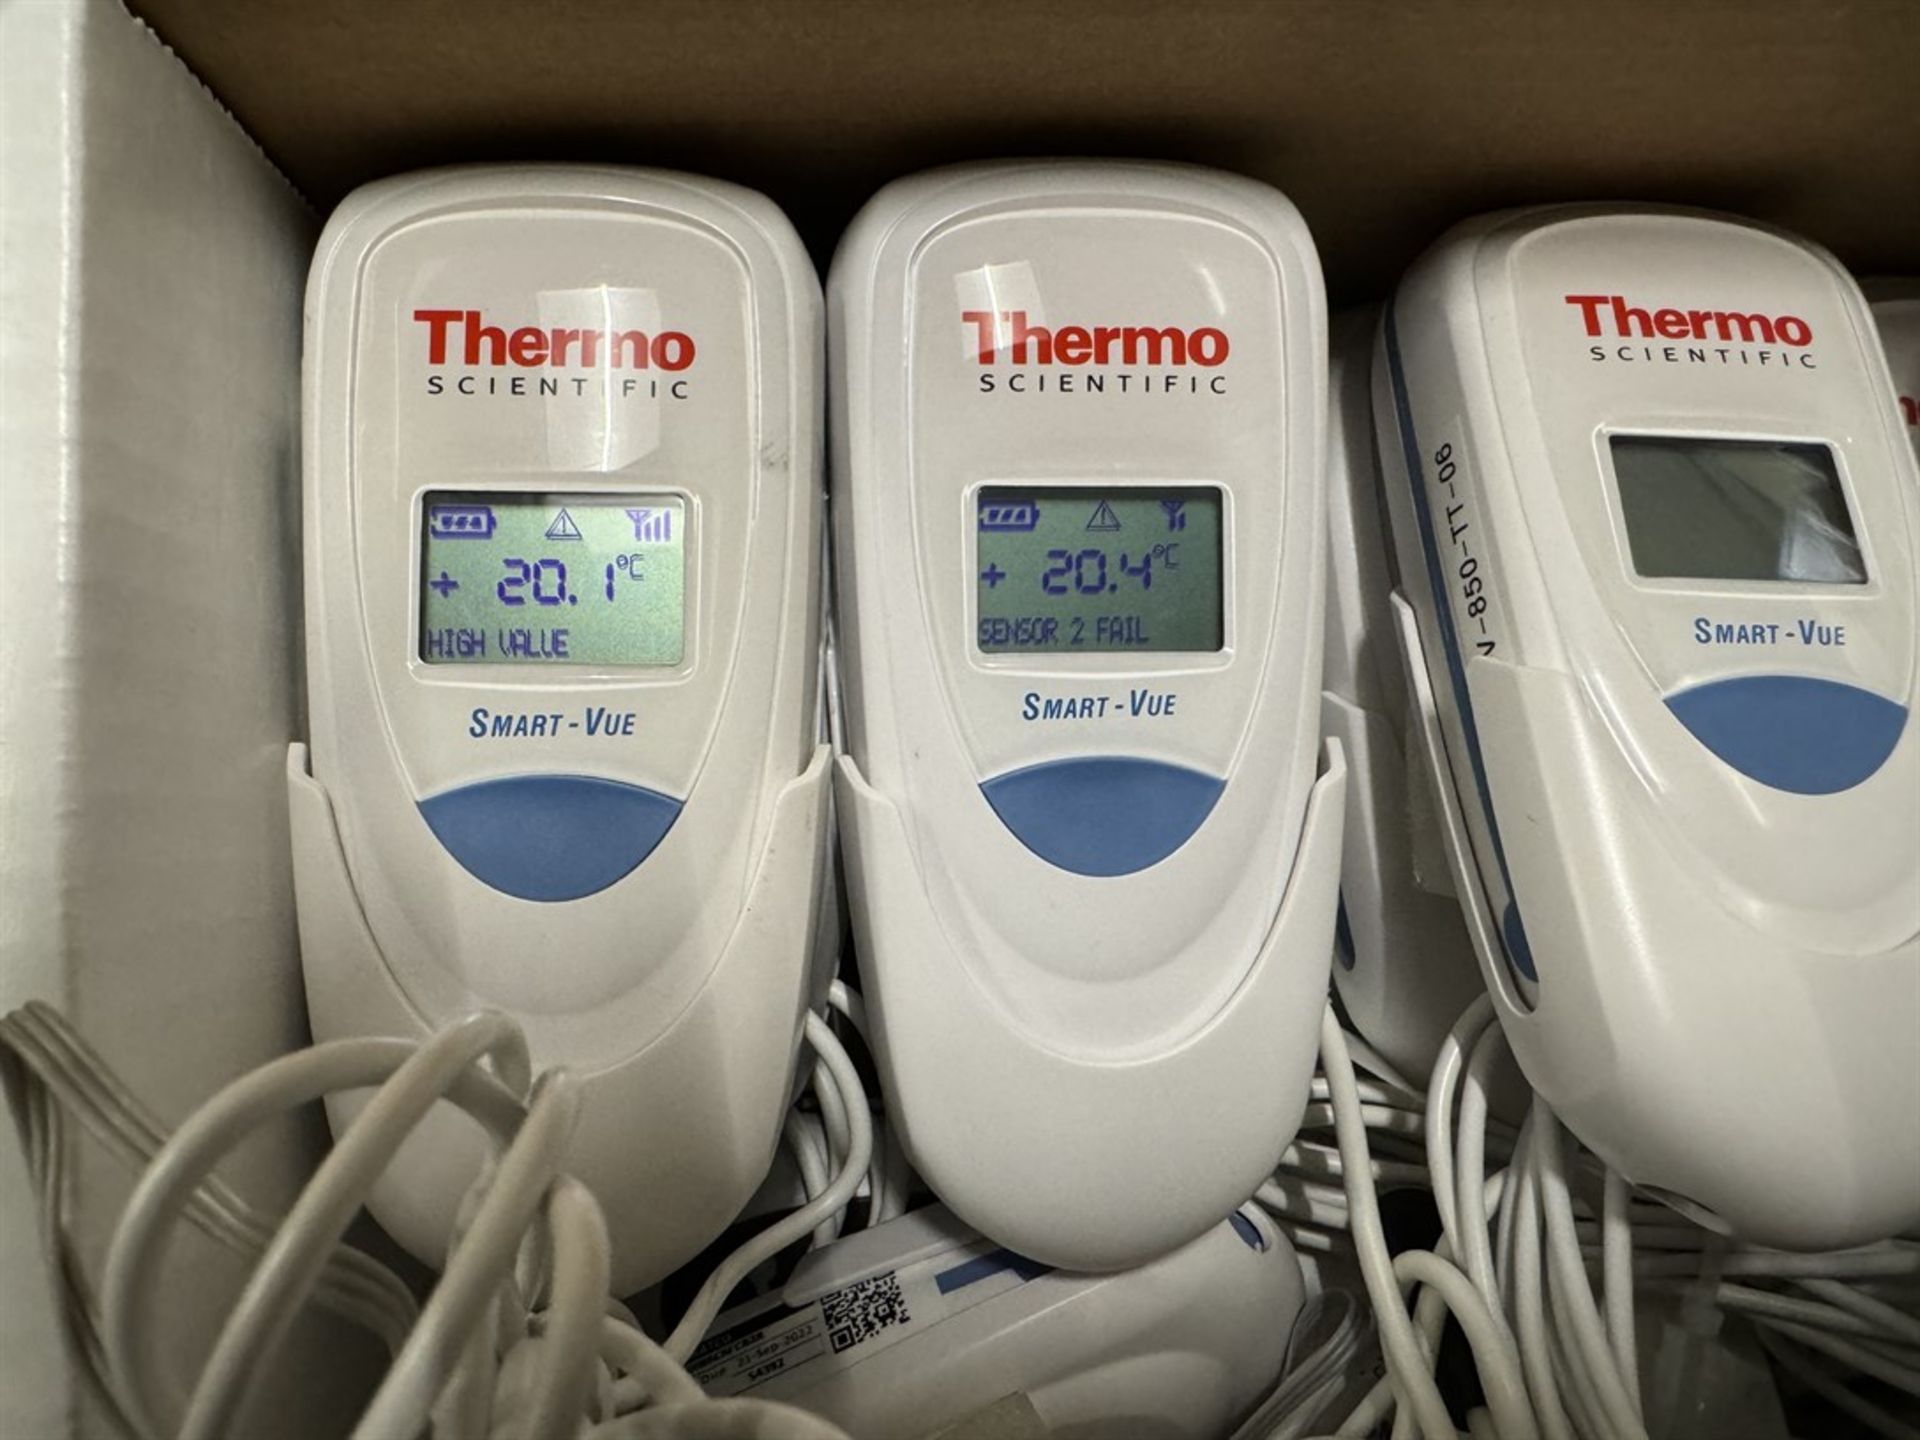 (22) THERMO SCIENTIFIC Smart Vue Remote Monitoring System - Image 4 of 8